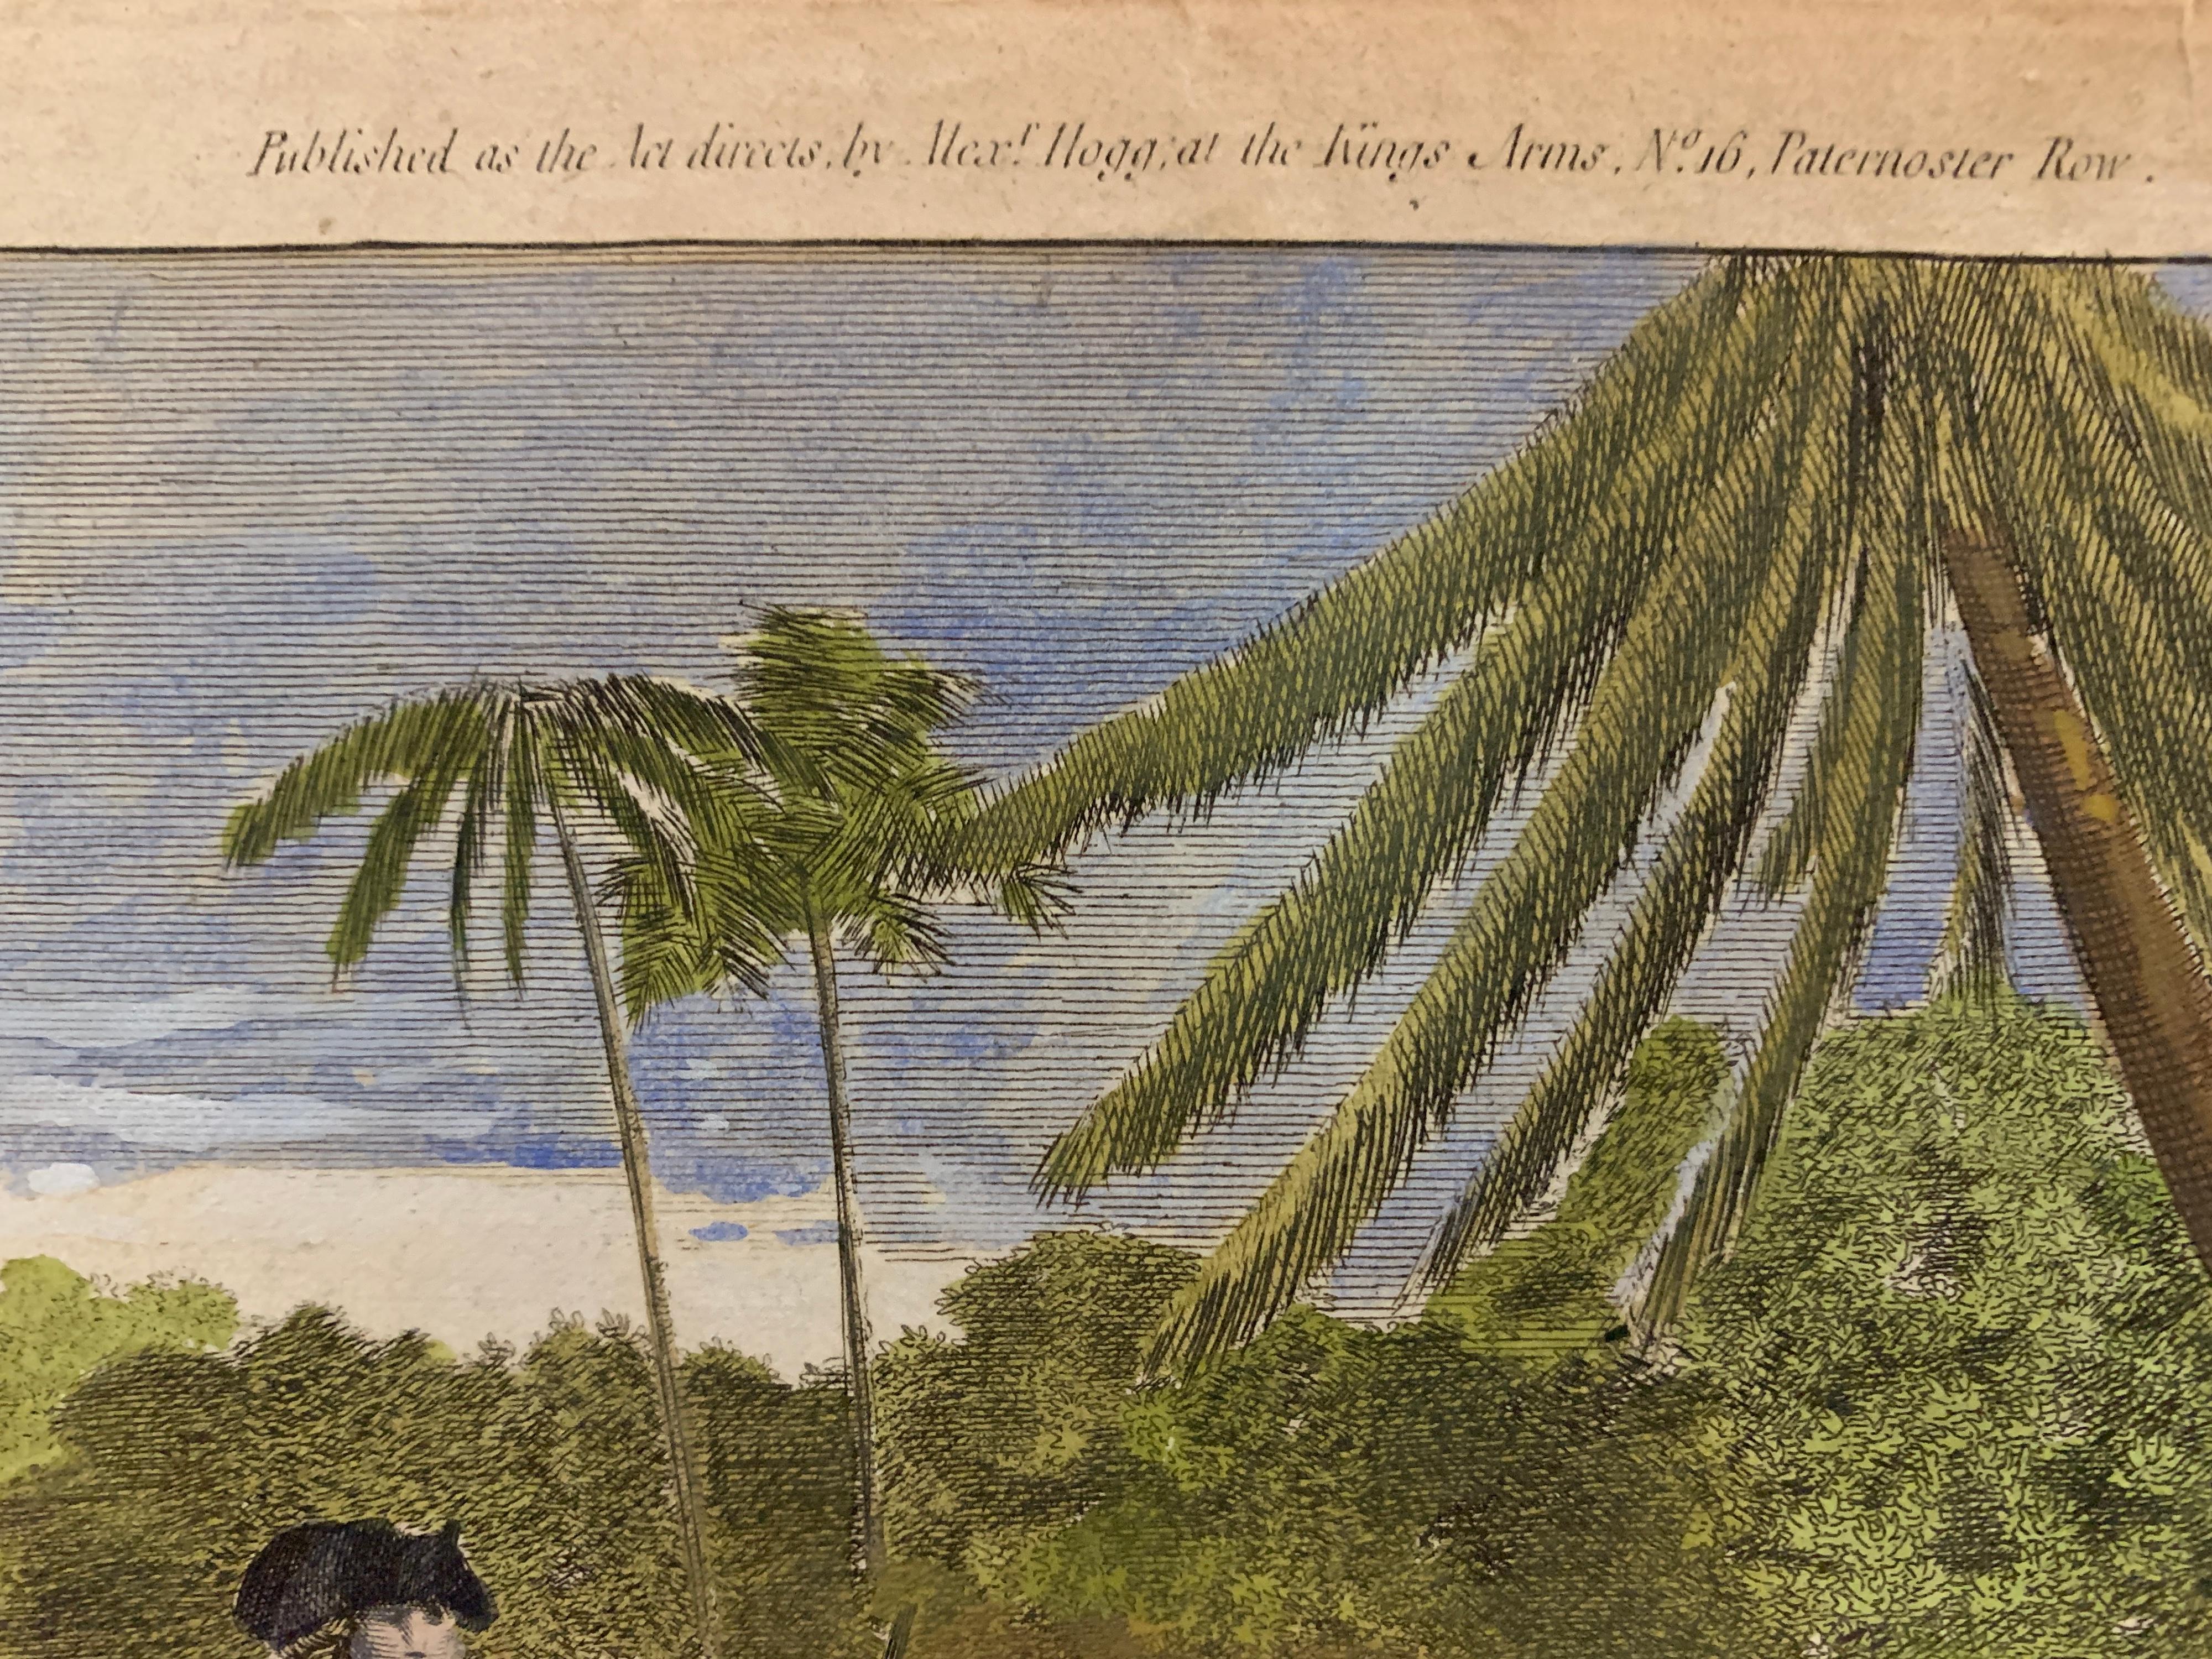 English 18th century of Captain Cook in Mallicolo and Erramanga, New Hebrides - Old Masters Print by English school 18th century